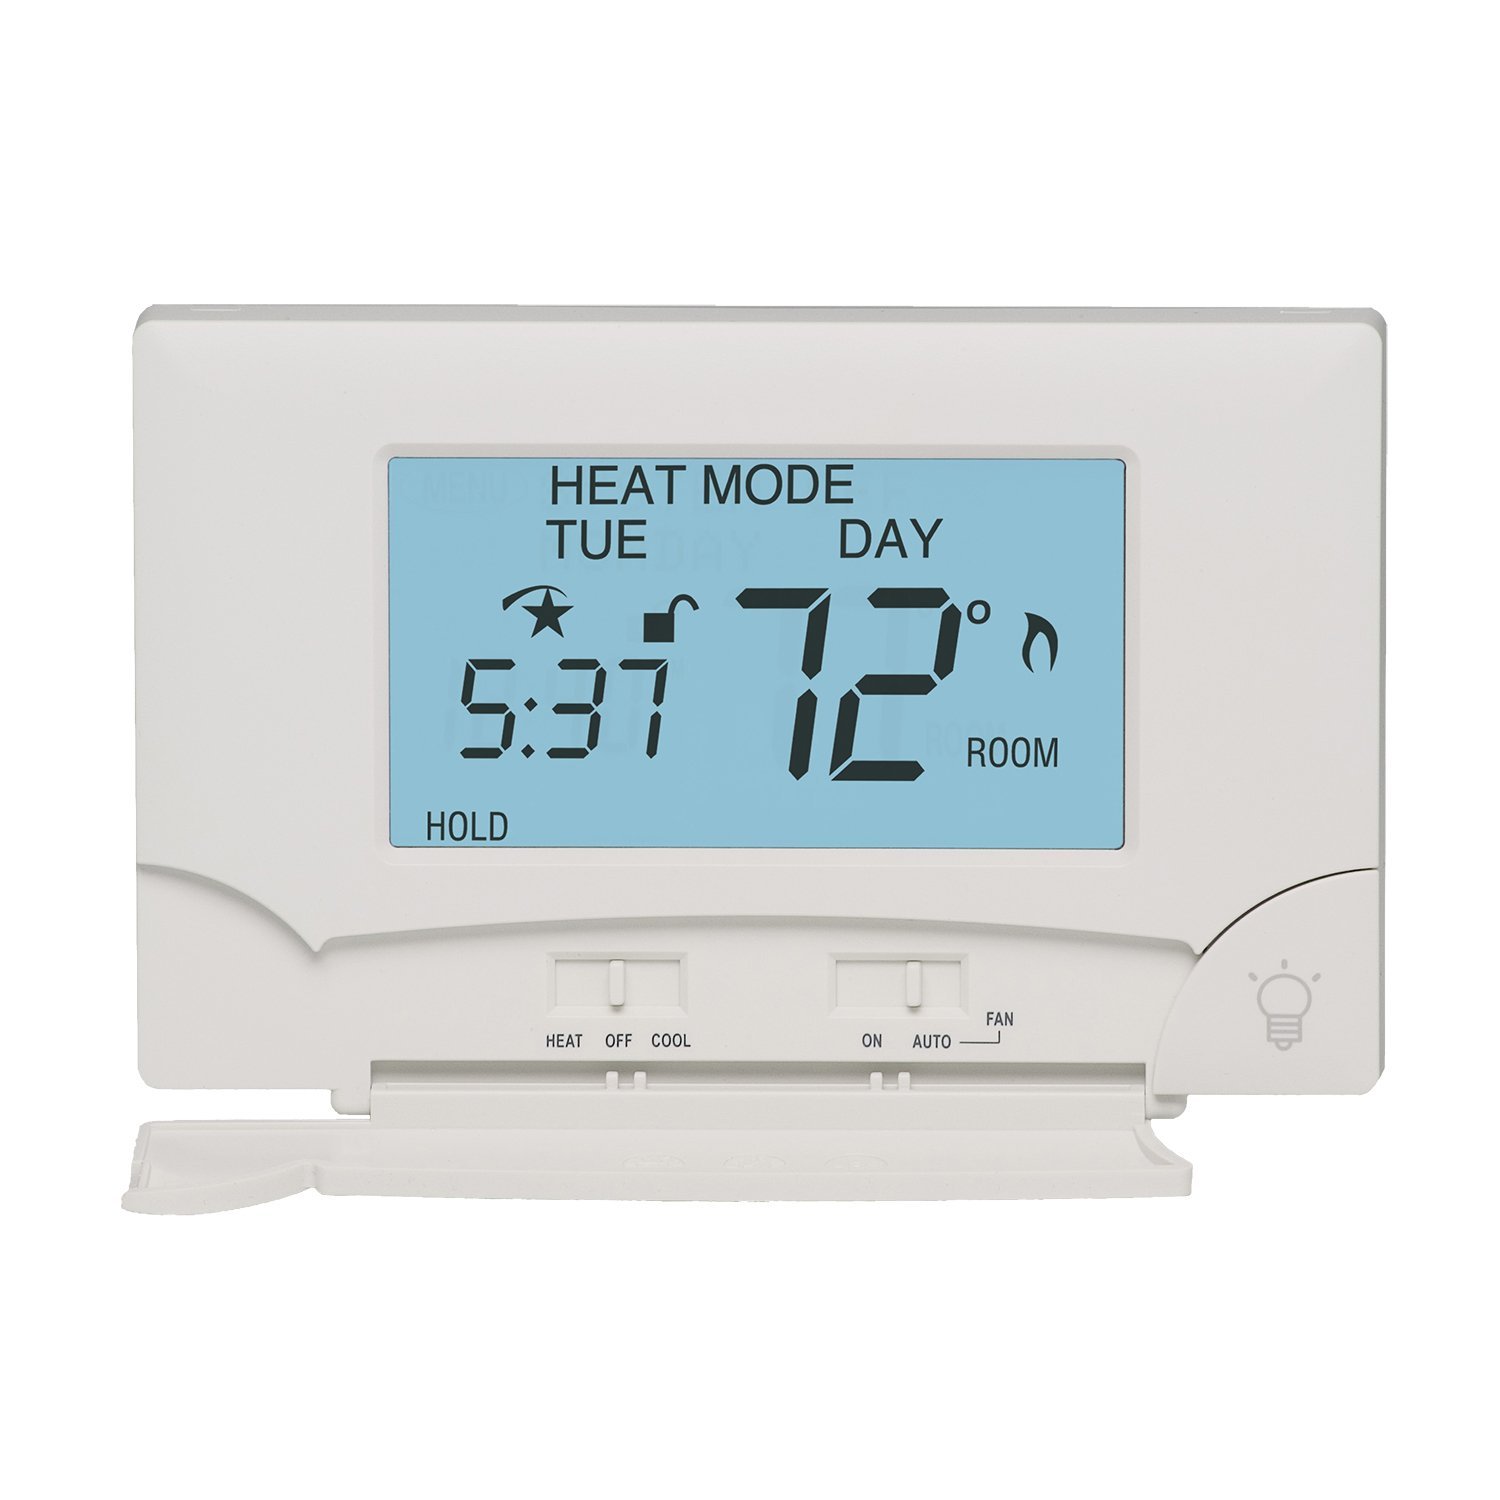 http://thetechjournal.com/wp-content/uploads/images/1202/1329391308-lux-tx9000ts-touch-screen-sevenday-programmable-thermostat-1.jpg